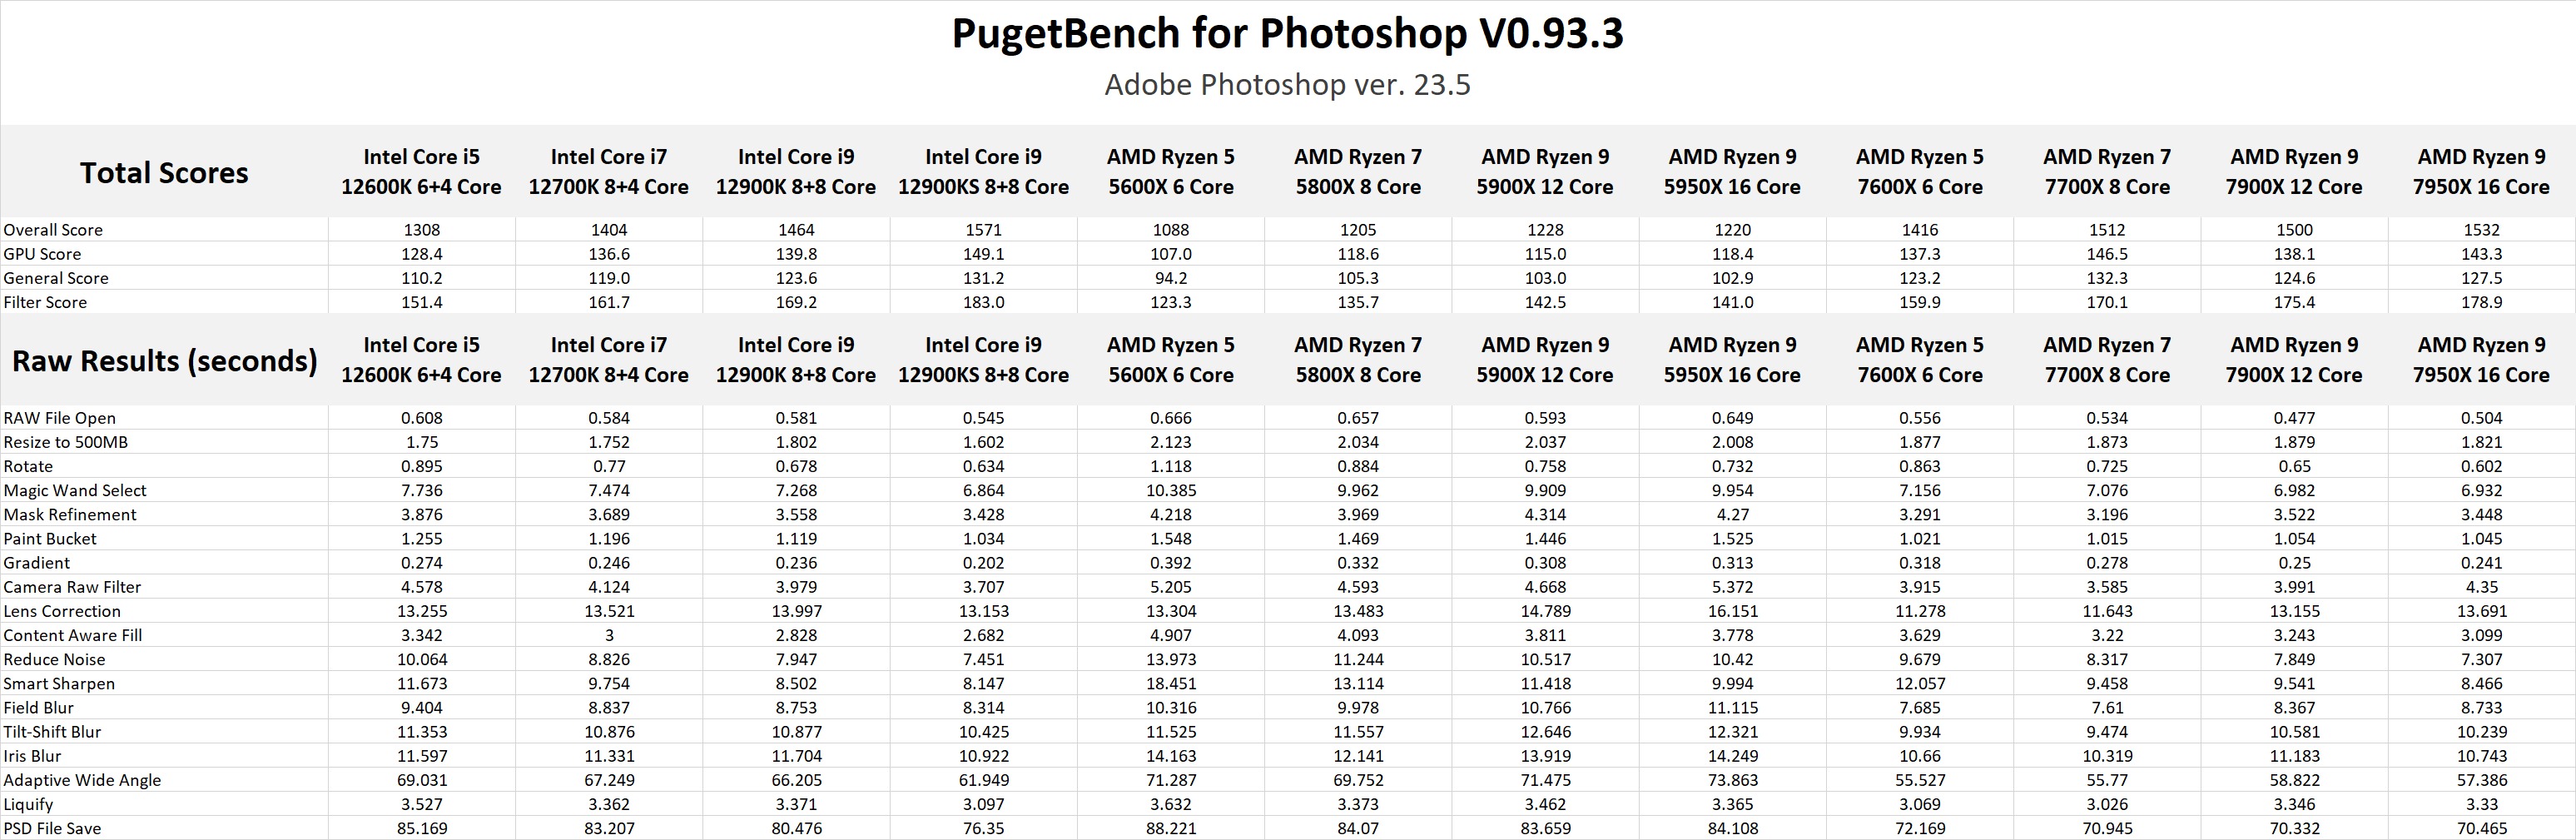 PugetBench for Photoshop AMD Ryzen 7000 raw results